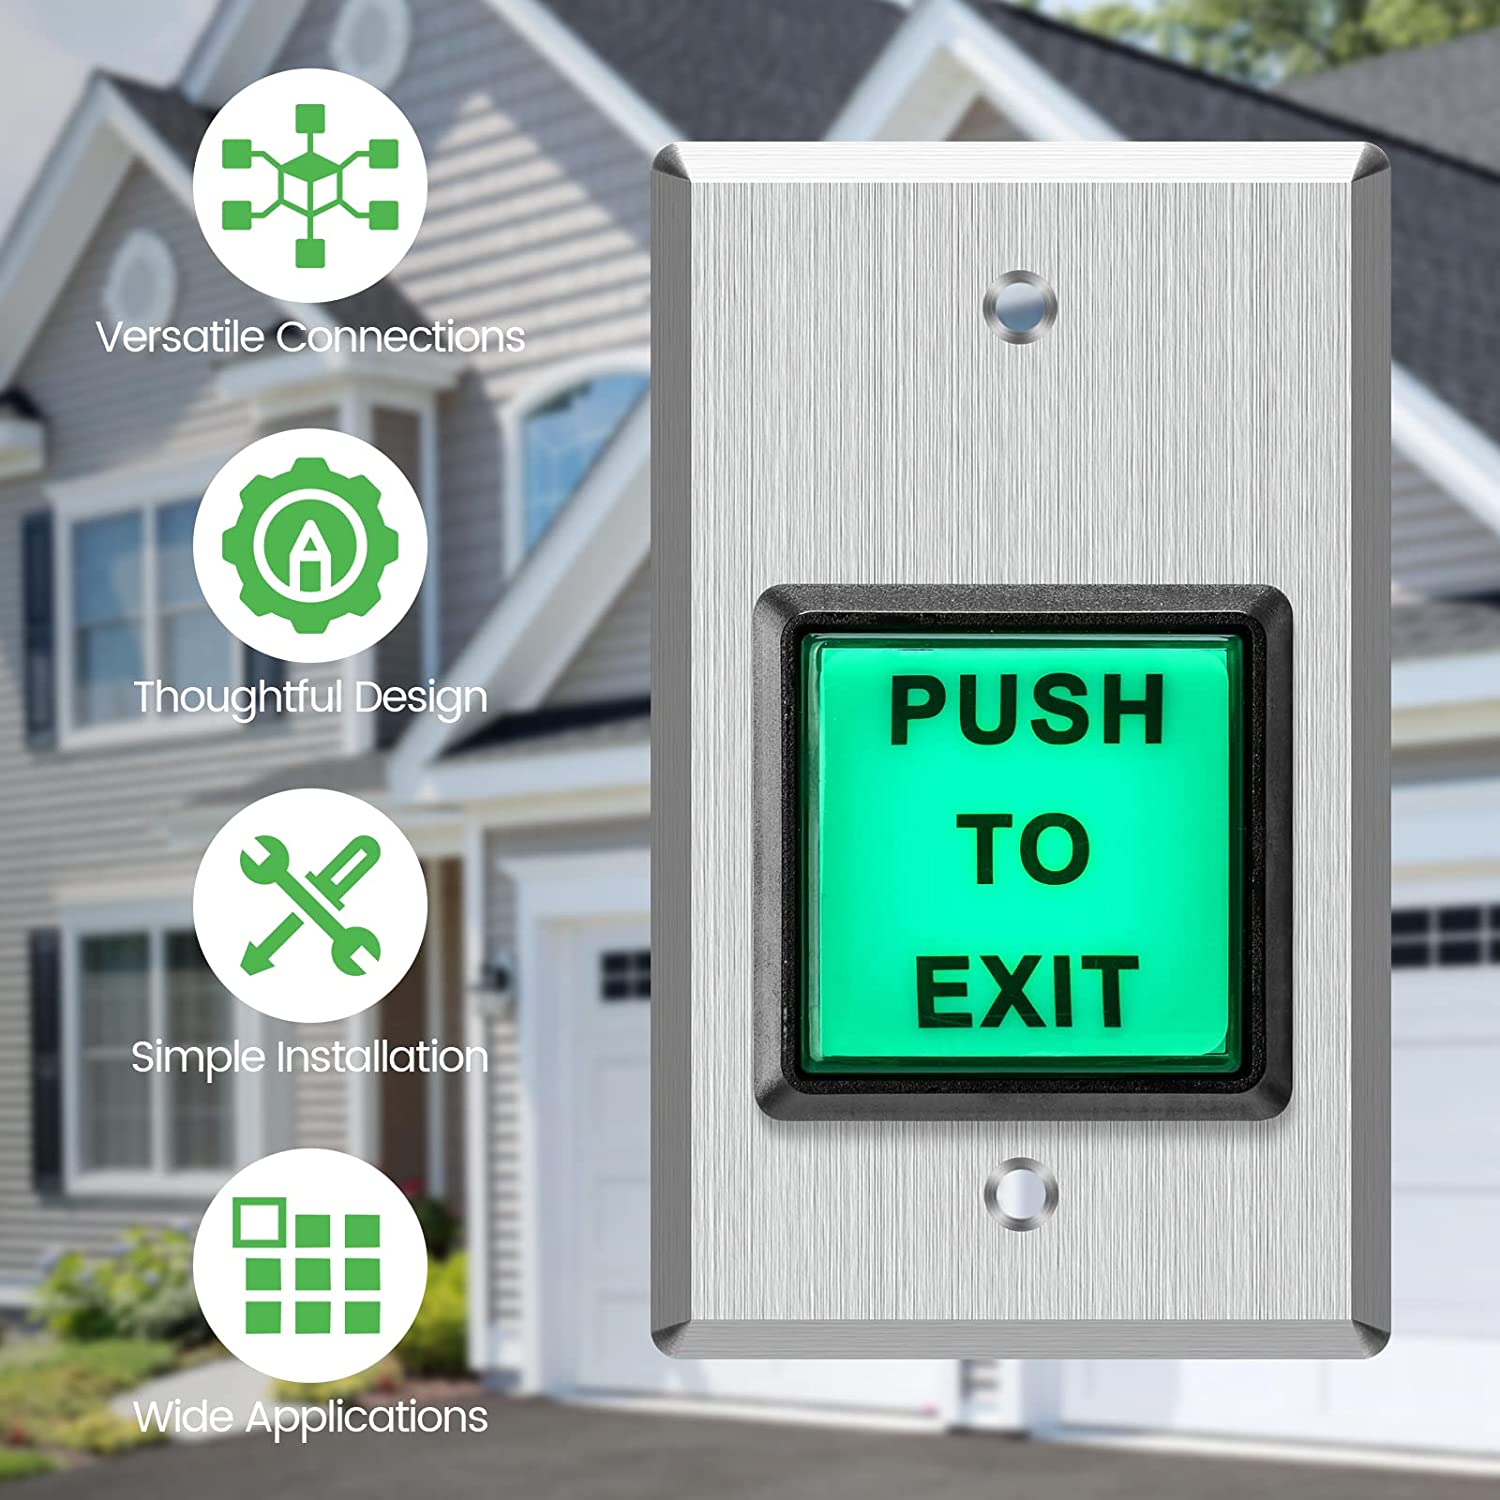 Push to Exit Button, Briidea Indoor Green Square Request to Exit Button with Green LED Square, Made of Stainless Steel, Sturdy & Durable